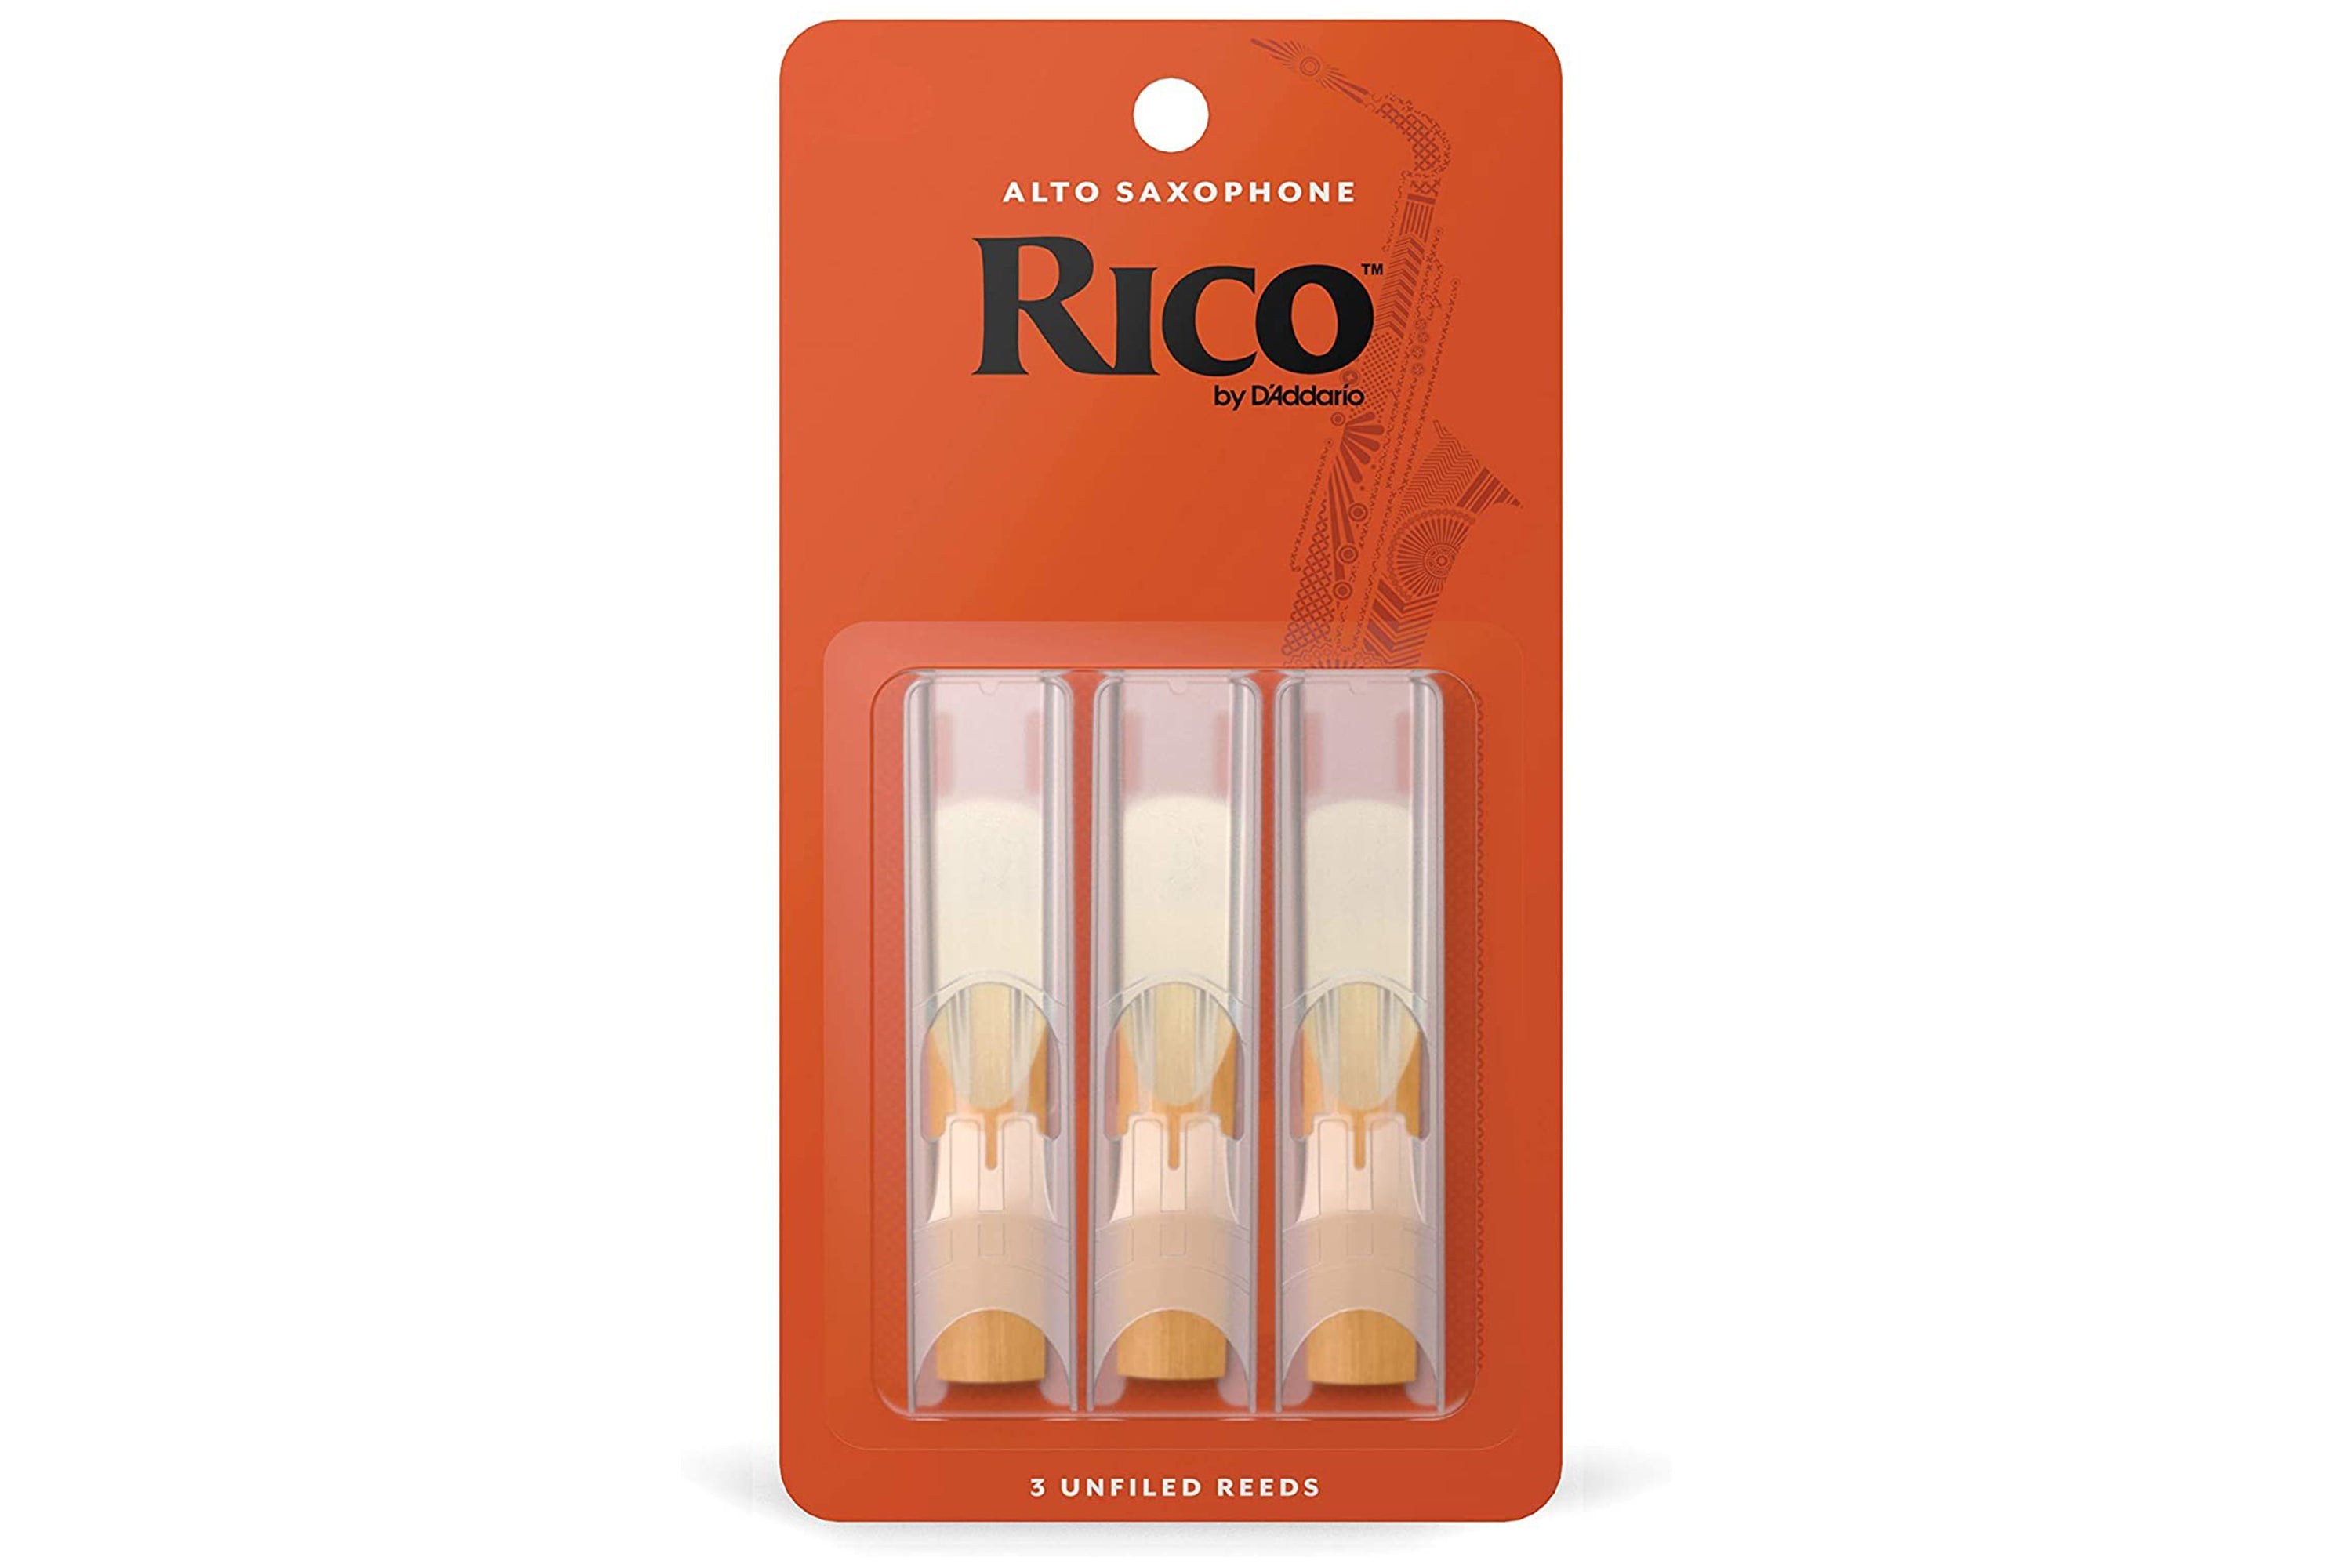 Rico by D'Addario Alto Saxophone Reeds Strength 3.0 - 3 Pack